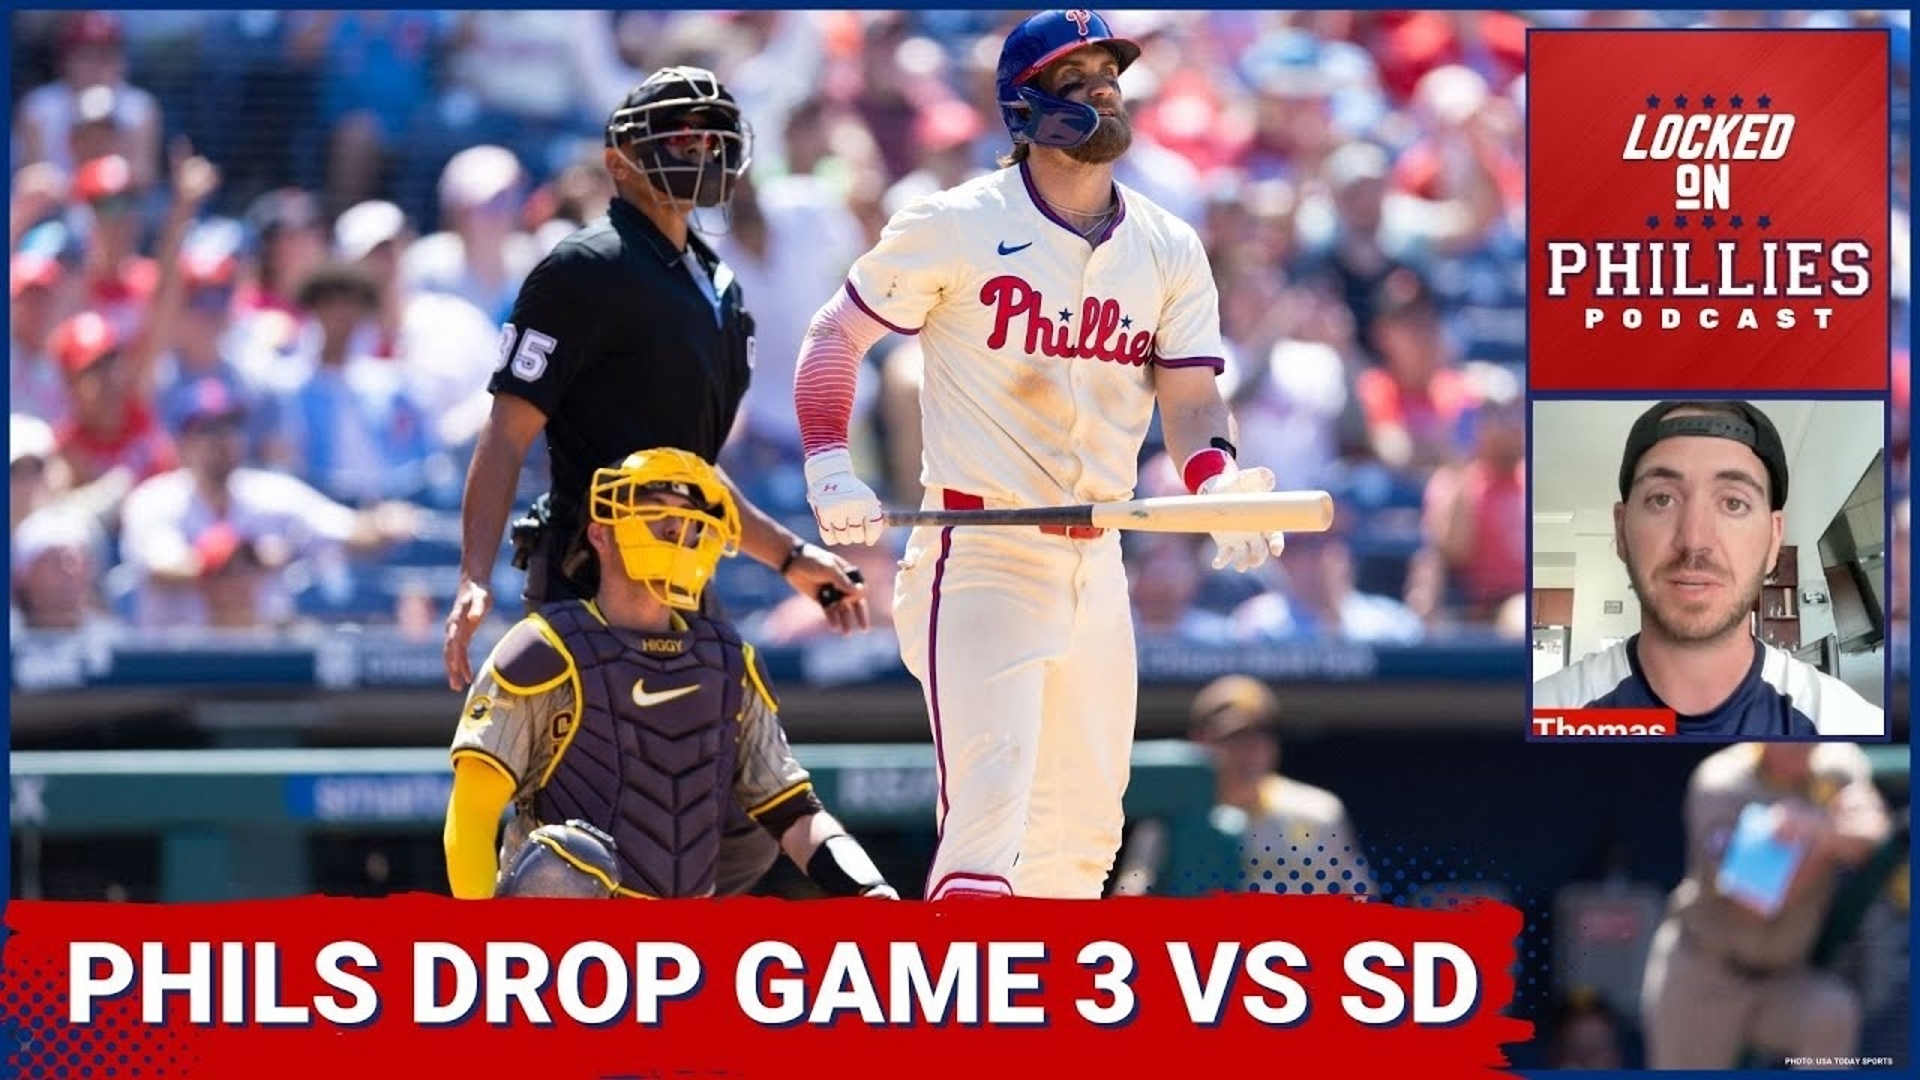 In today's episode, Connor reacts to the Philadelphia Phillies' series win over the San Diego Padres, and dives into the game 3 loss.